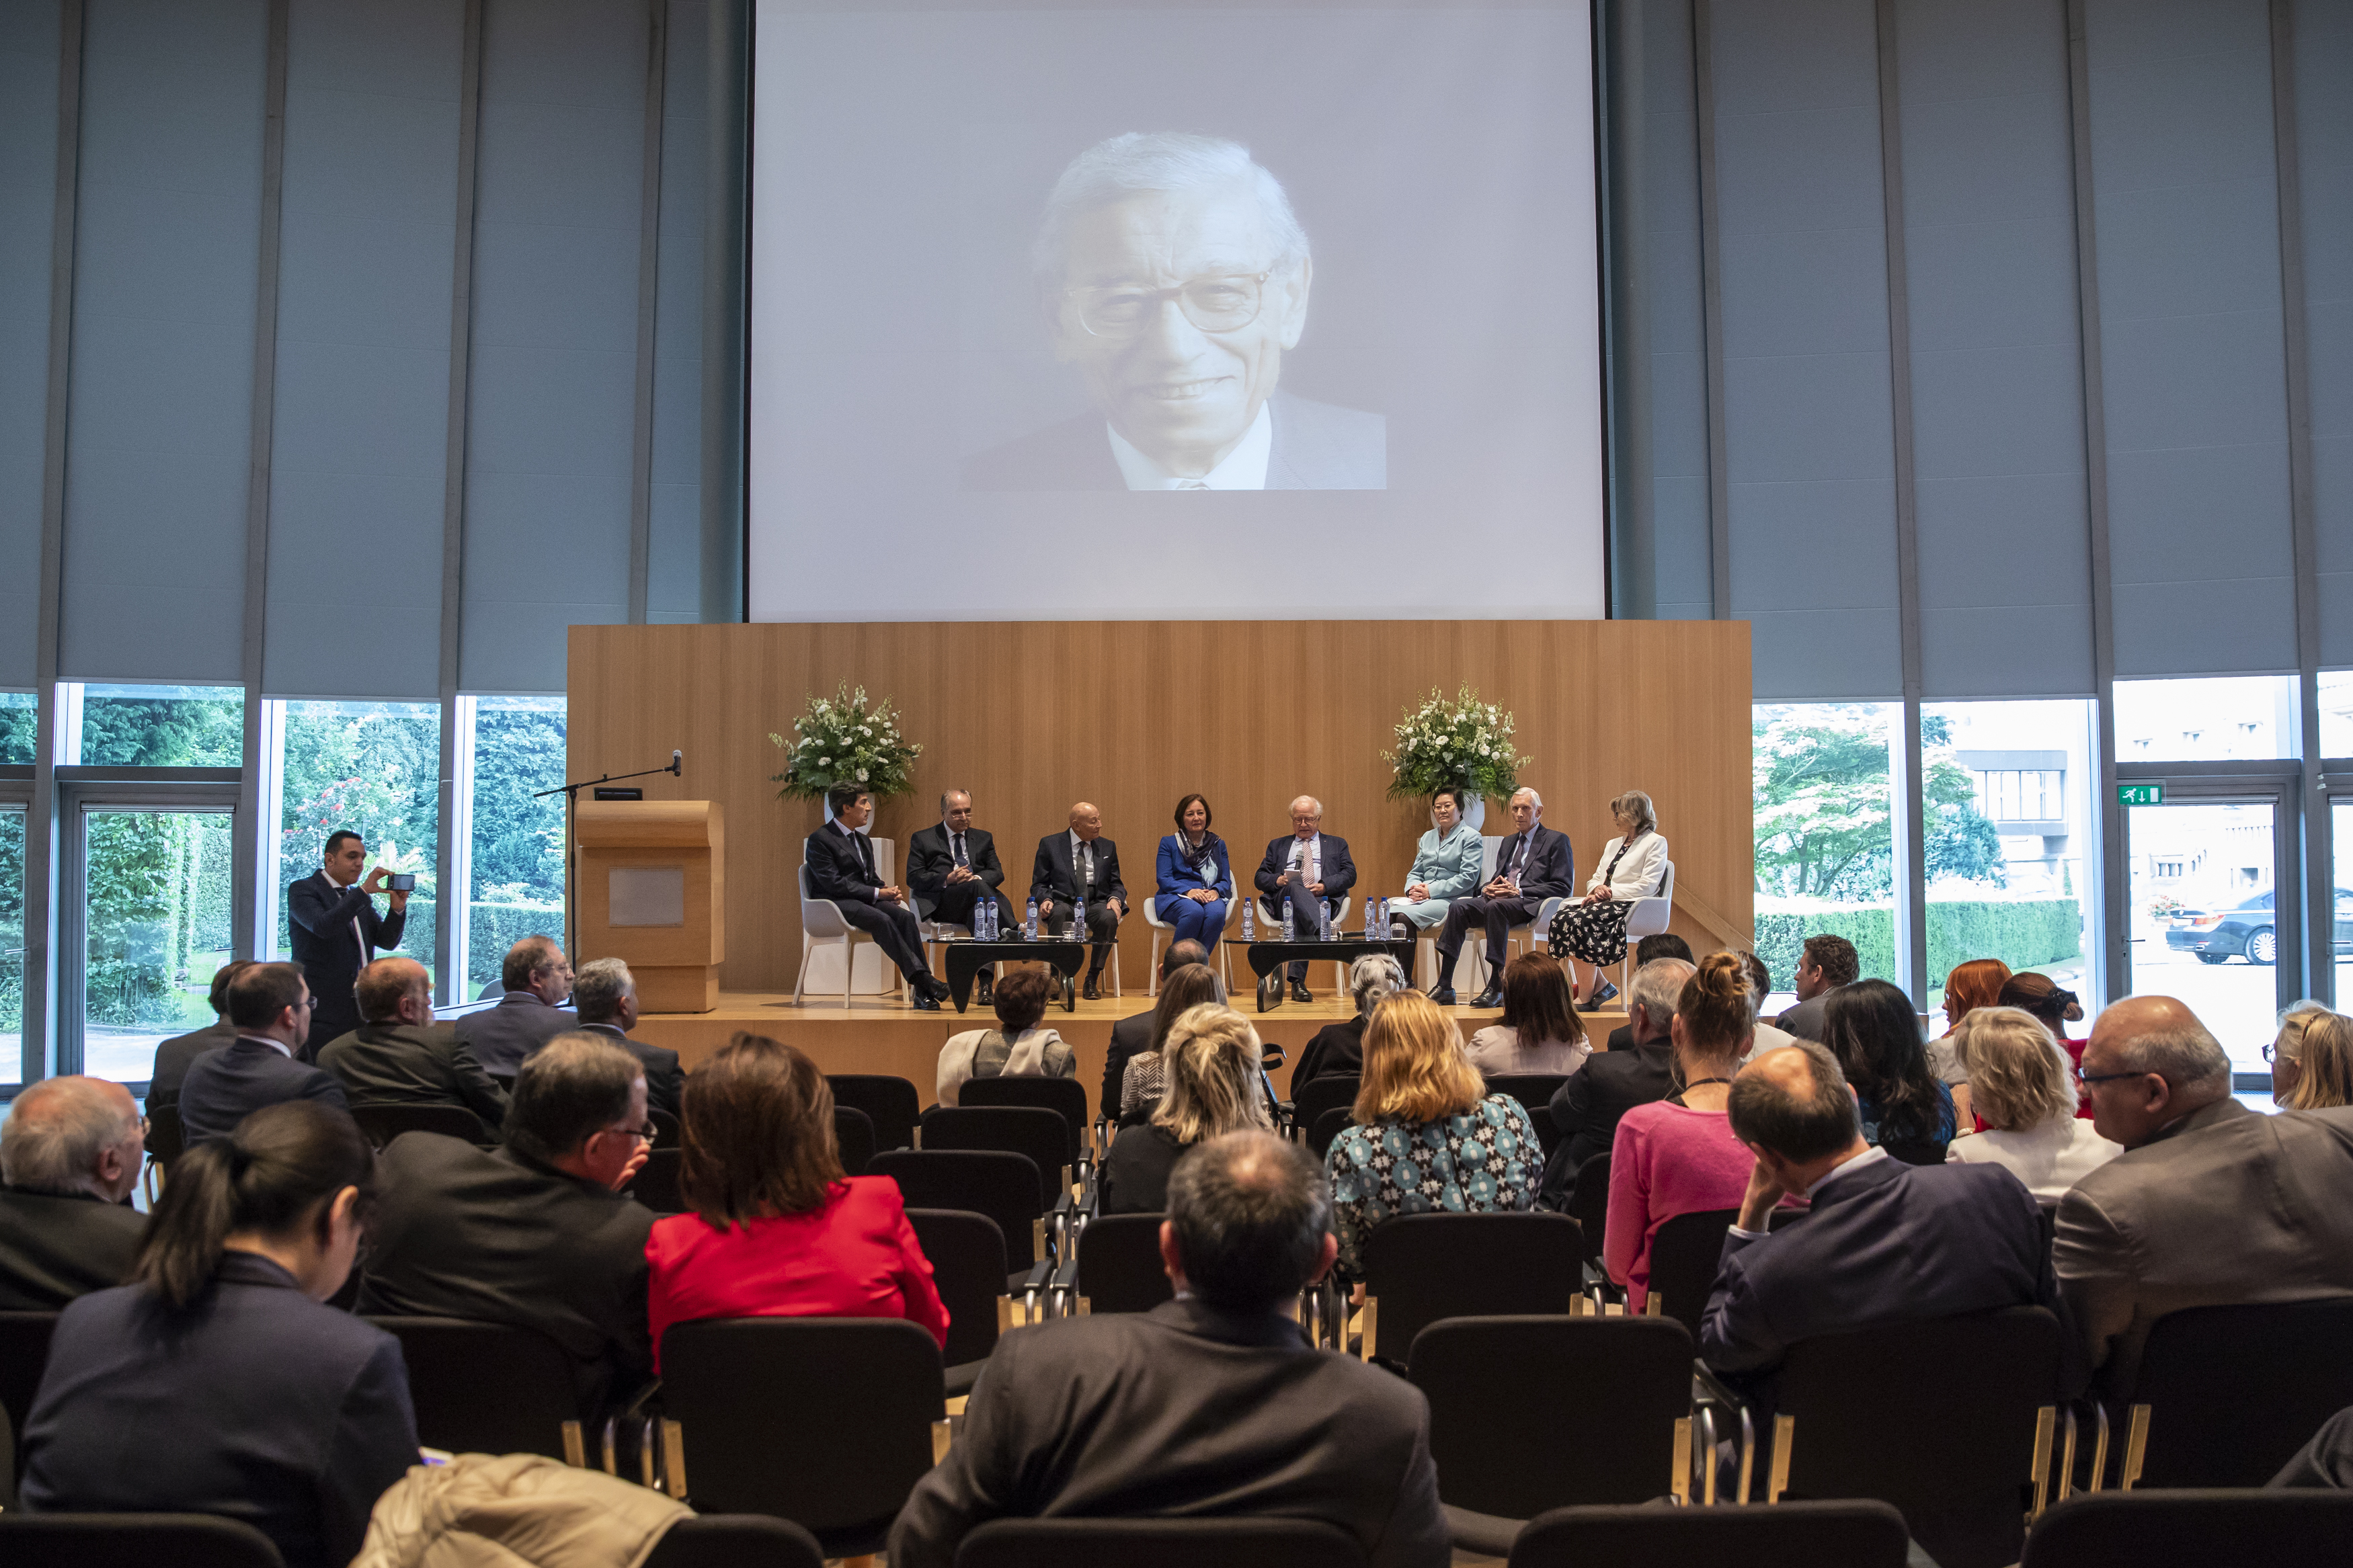 Opening of the Dr. Boutros-Ghali Commemoration at The Hague Academy of International Law June 21 2018